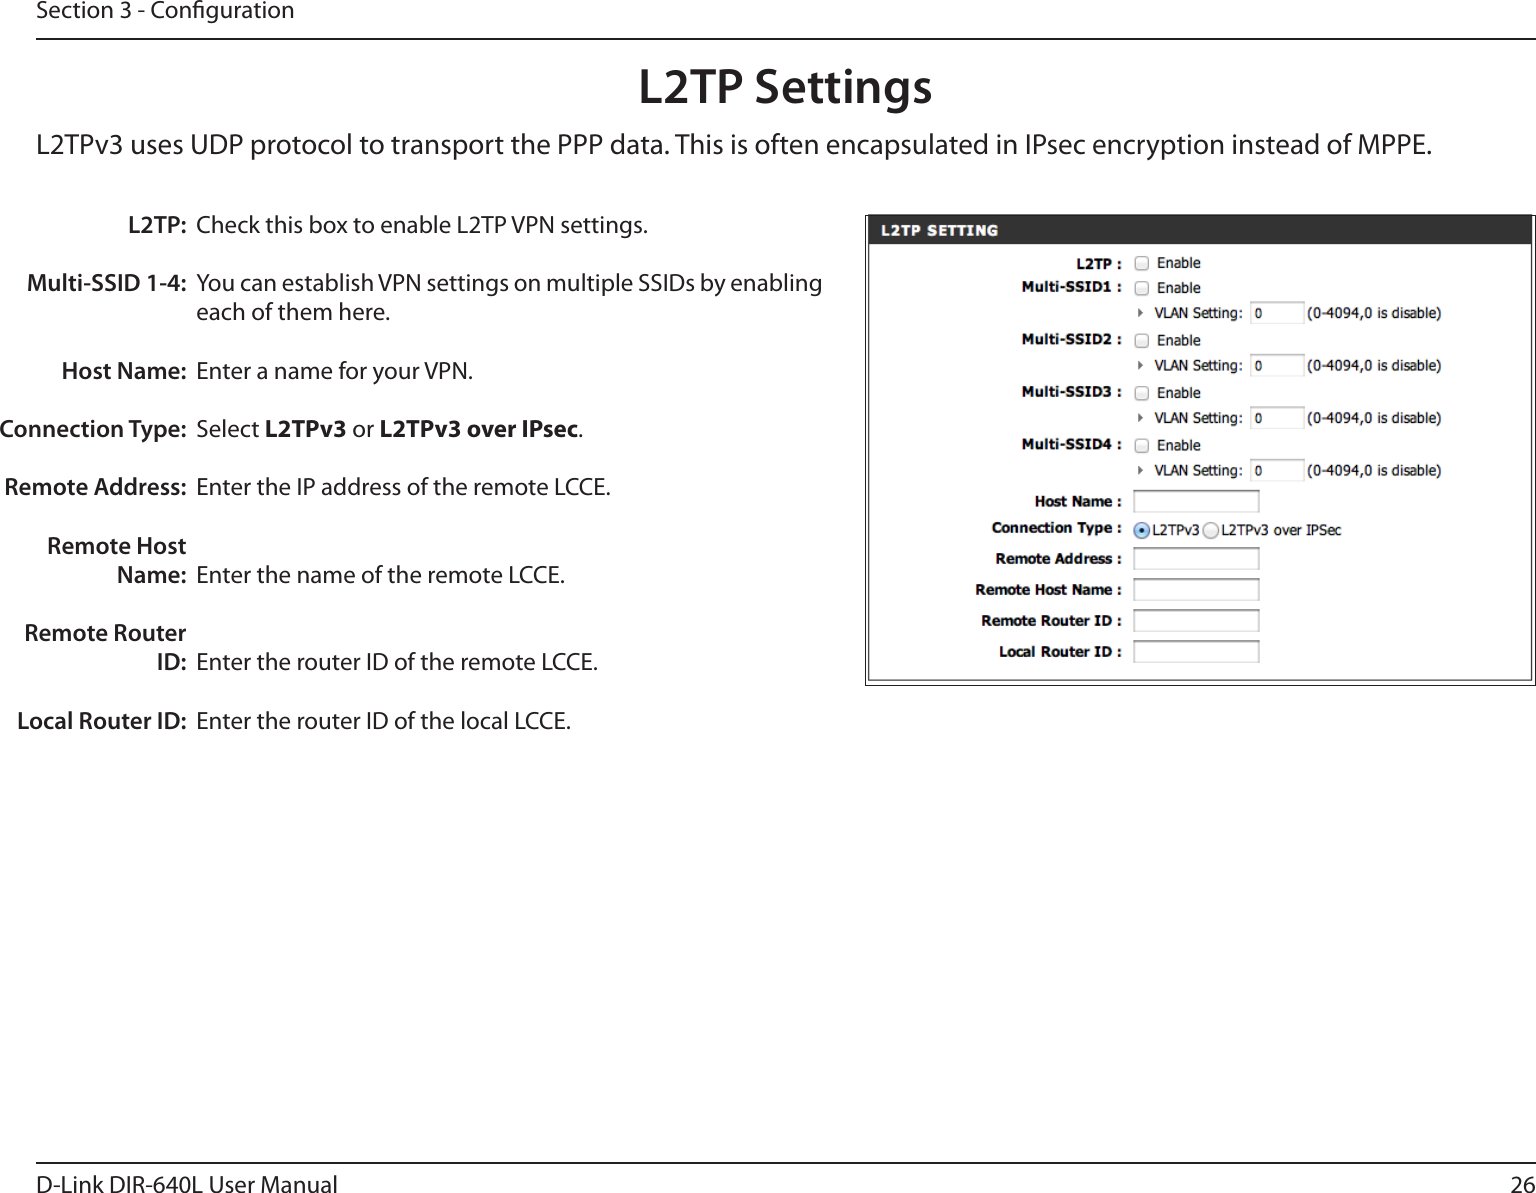 26D-Link DIR-640L User ManualSection 3 - CongurationL2TP SettingsL2TPv3 uses UDP protocol to transport the PPP data. This is often encapsulated in IPsec encryption instead of MPPE.Check this box to enable L2TP VPN settings.You can establish VPN settings on multiple SSIDs by enabling each of them here.Enter a name for your VPN.Select L2TPv3 or L2TPv3 over IPsec.Enter the IP address of the remote LCCE.Enter the name of the remote LCCE.Enter the router ID of the remote LCCE.Enter the router ID of the local LCCE.L2TP:Multi-SSID 1-4:Host Name:Connection Type:Remote Address:Remote Host Name:Remote Router ID:Local Router ID: